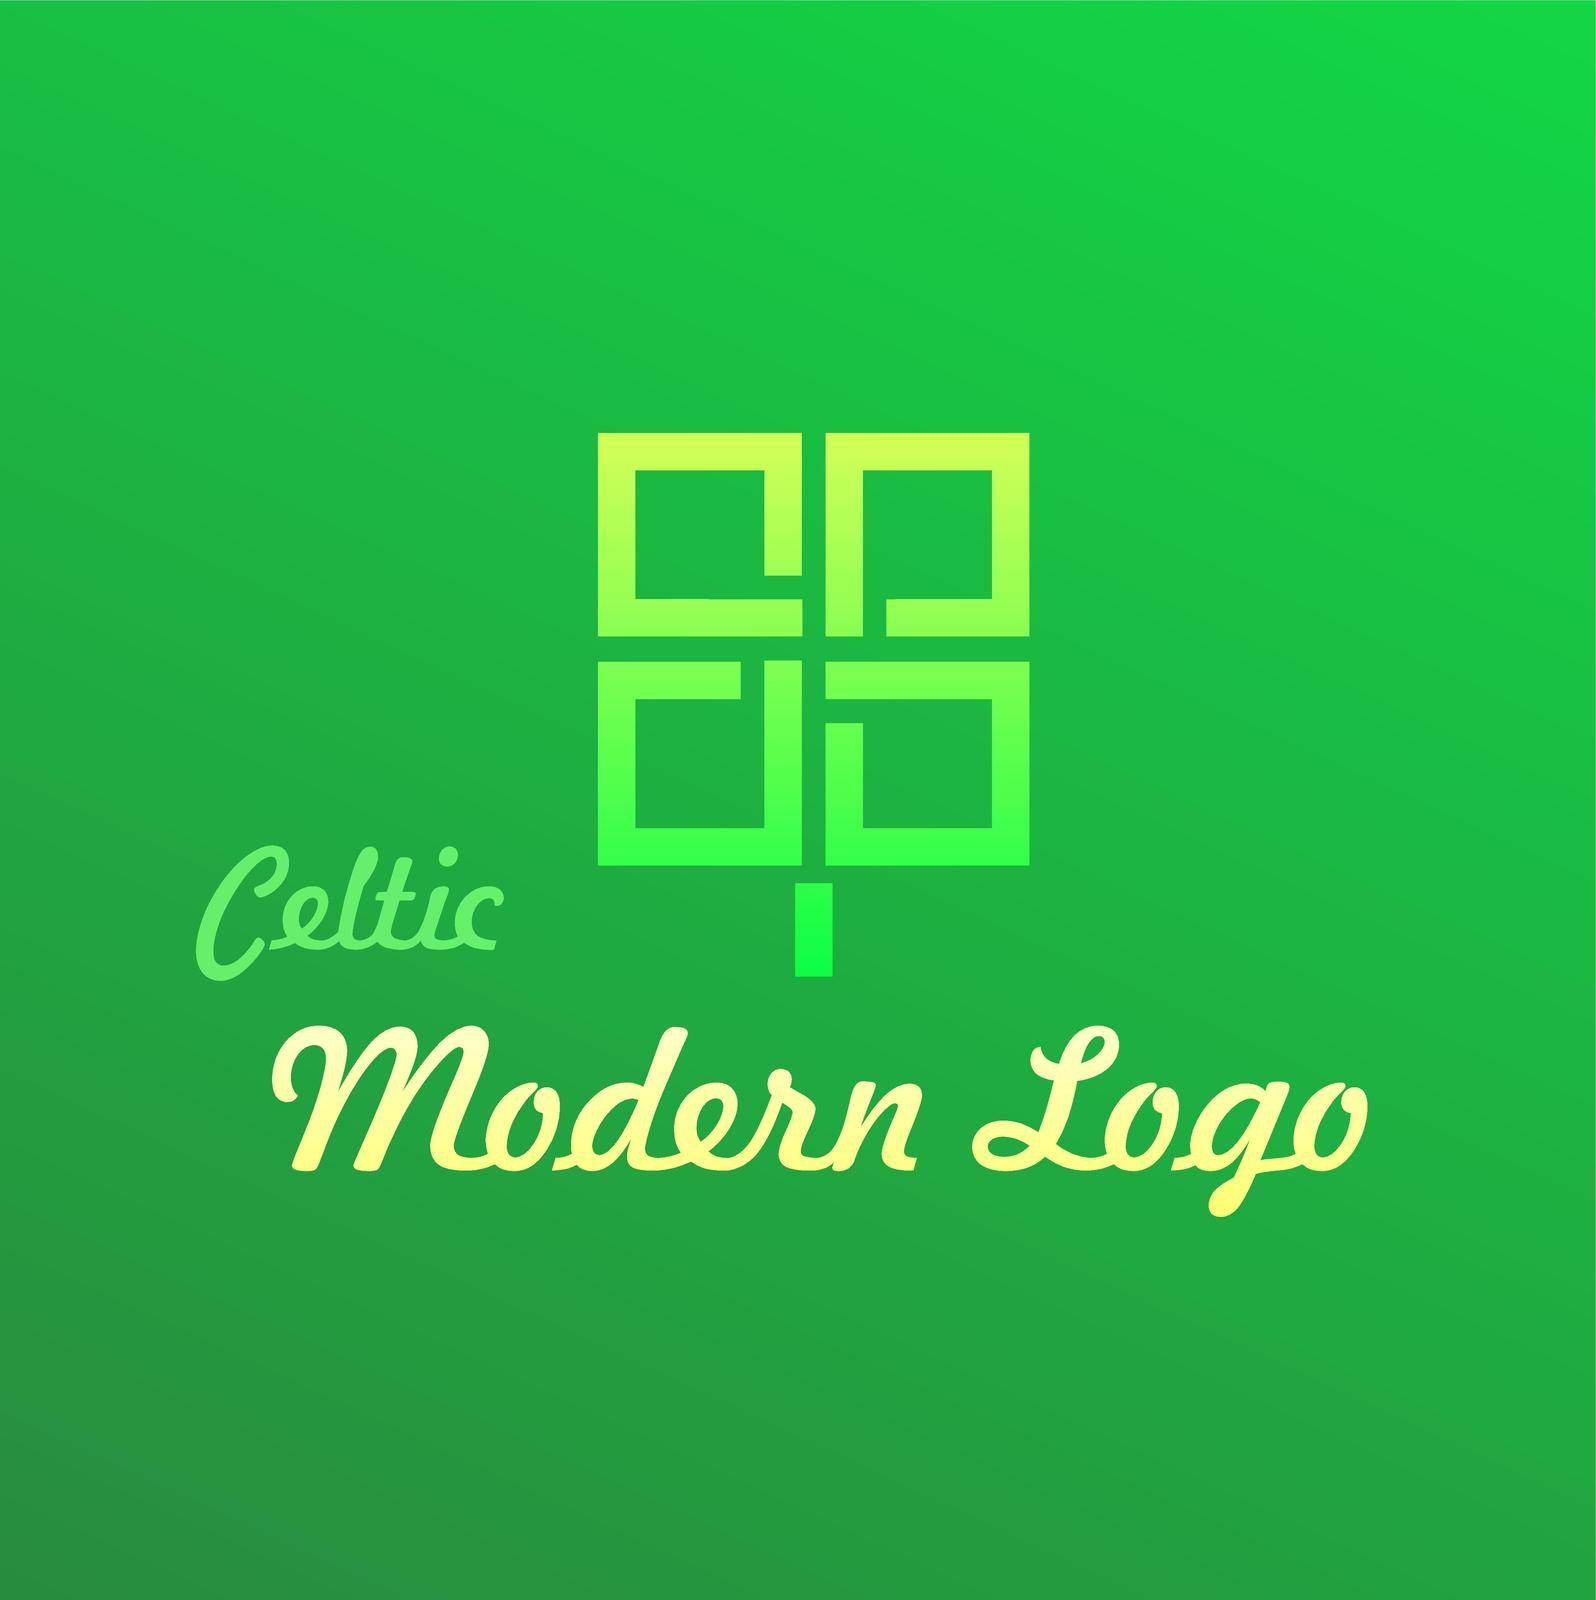 Modern Logo for a Website with a Irish Celtic theme